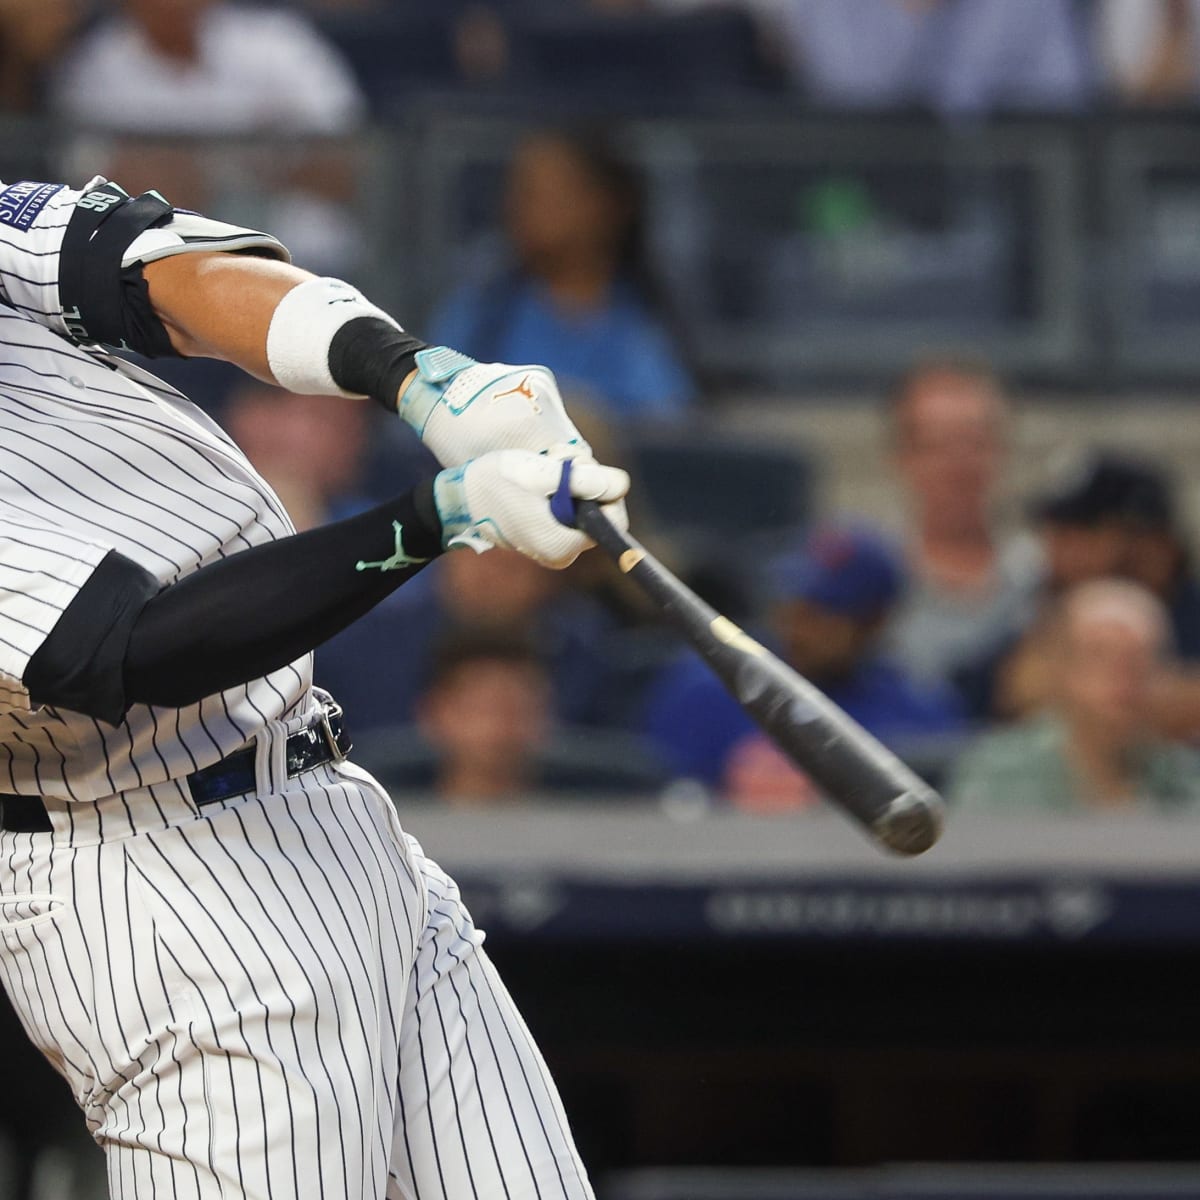 Aaron Judge continues on-base streak in game against Clevland